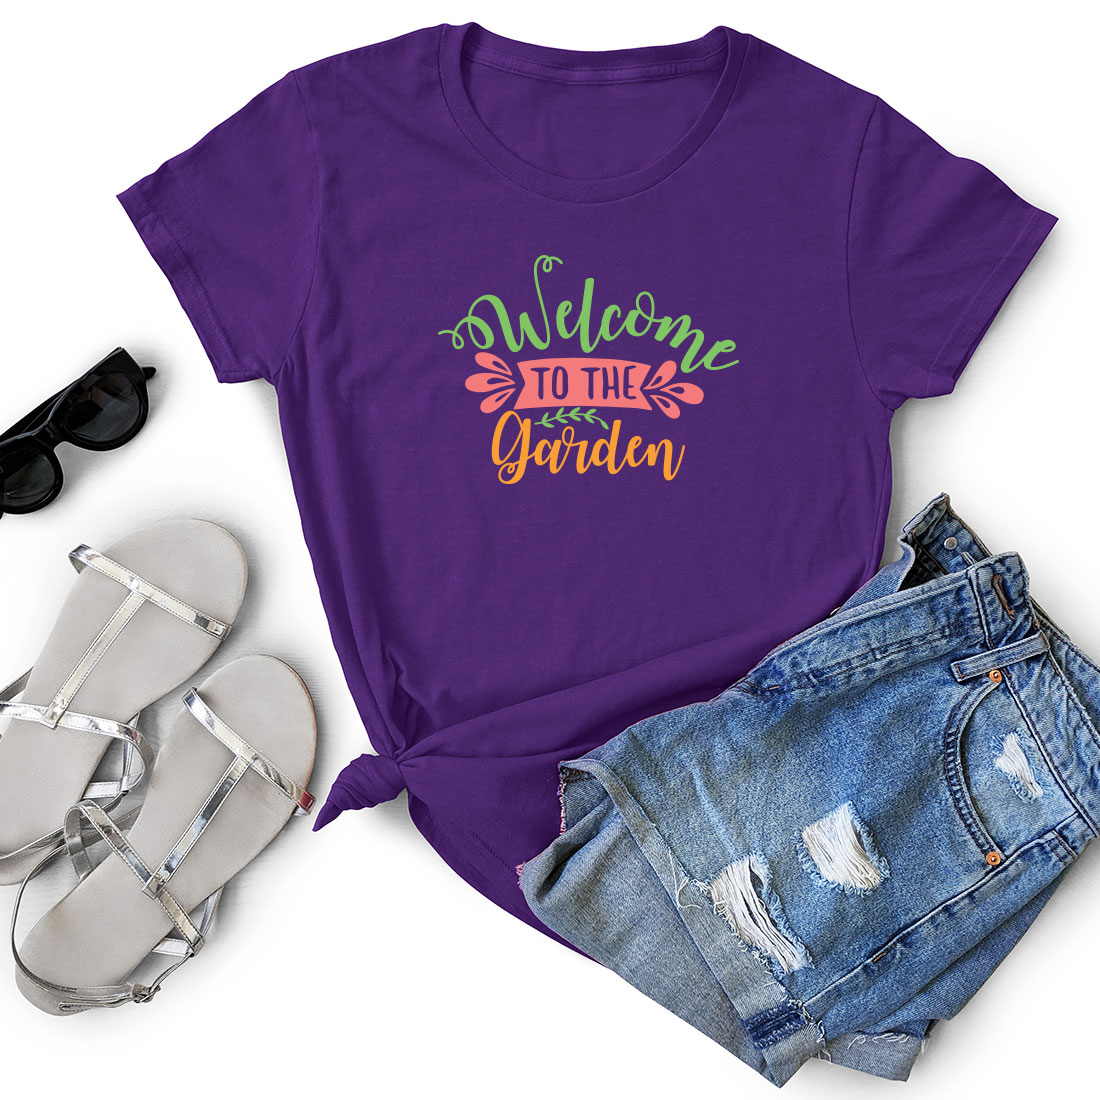 Purple t - shirt that says welcome to the garden.